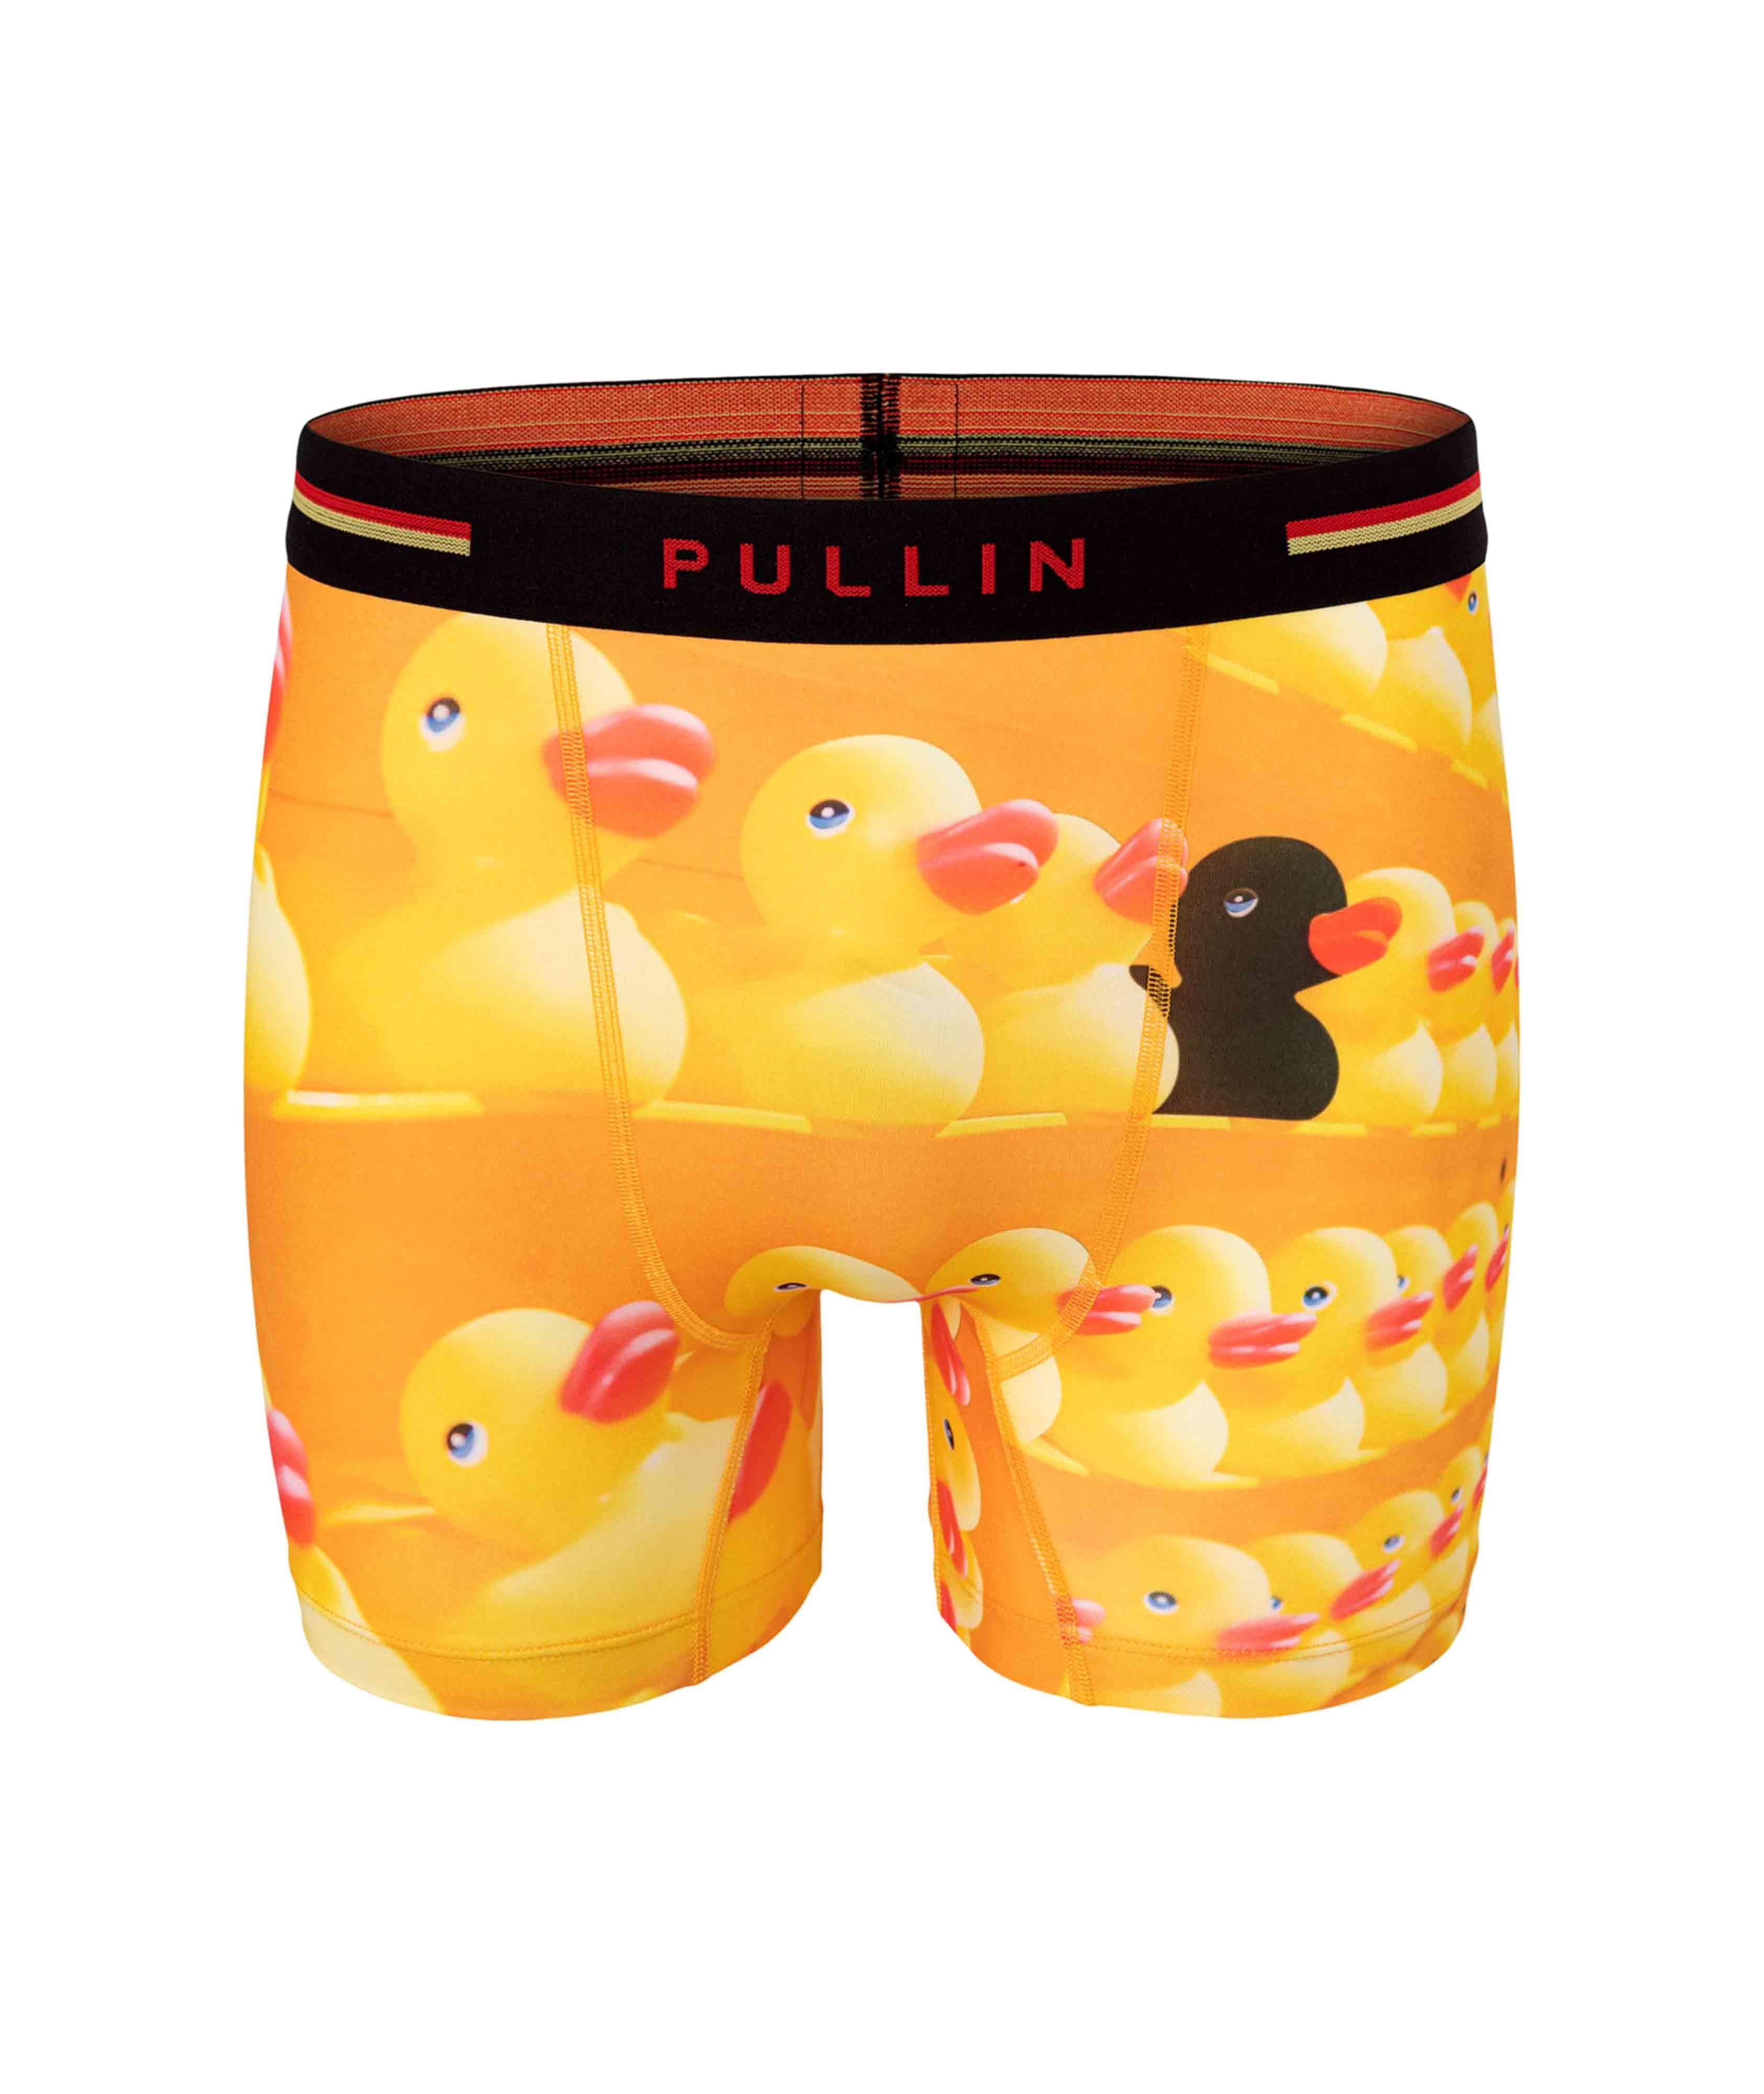 Fashion 2 COINCOIN Boxers image 0